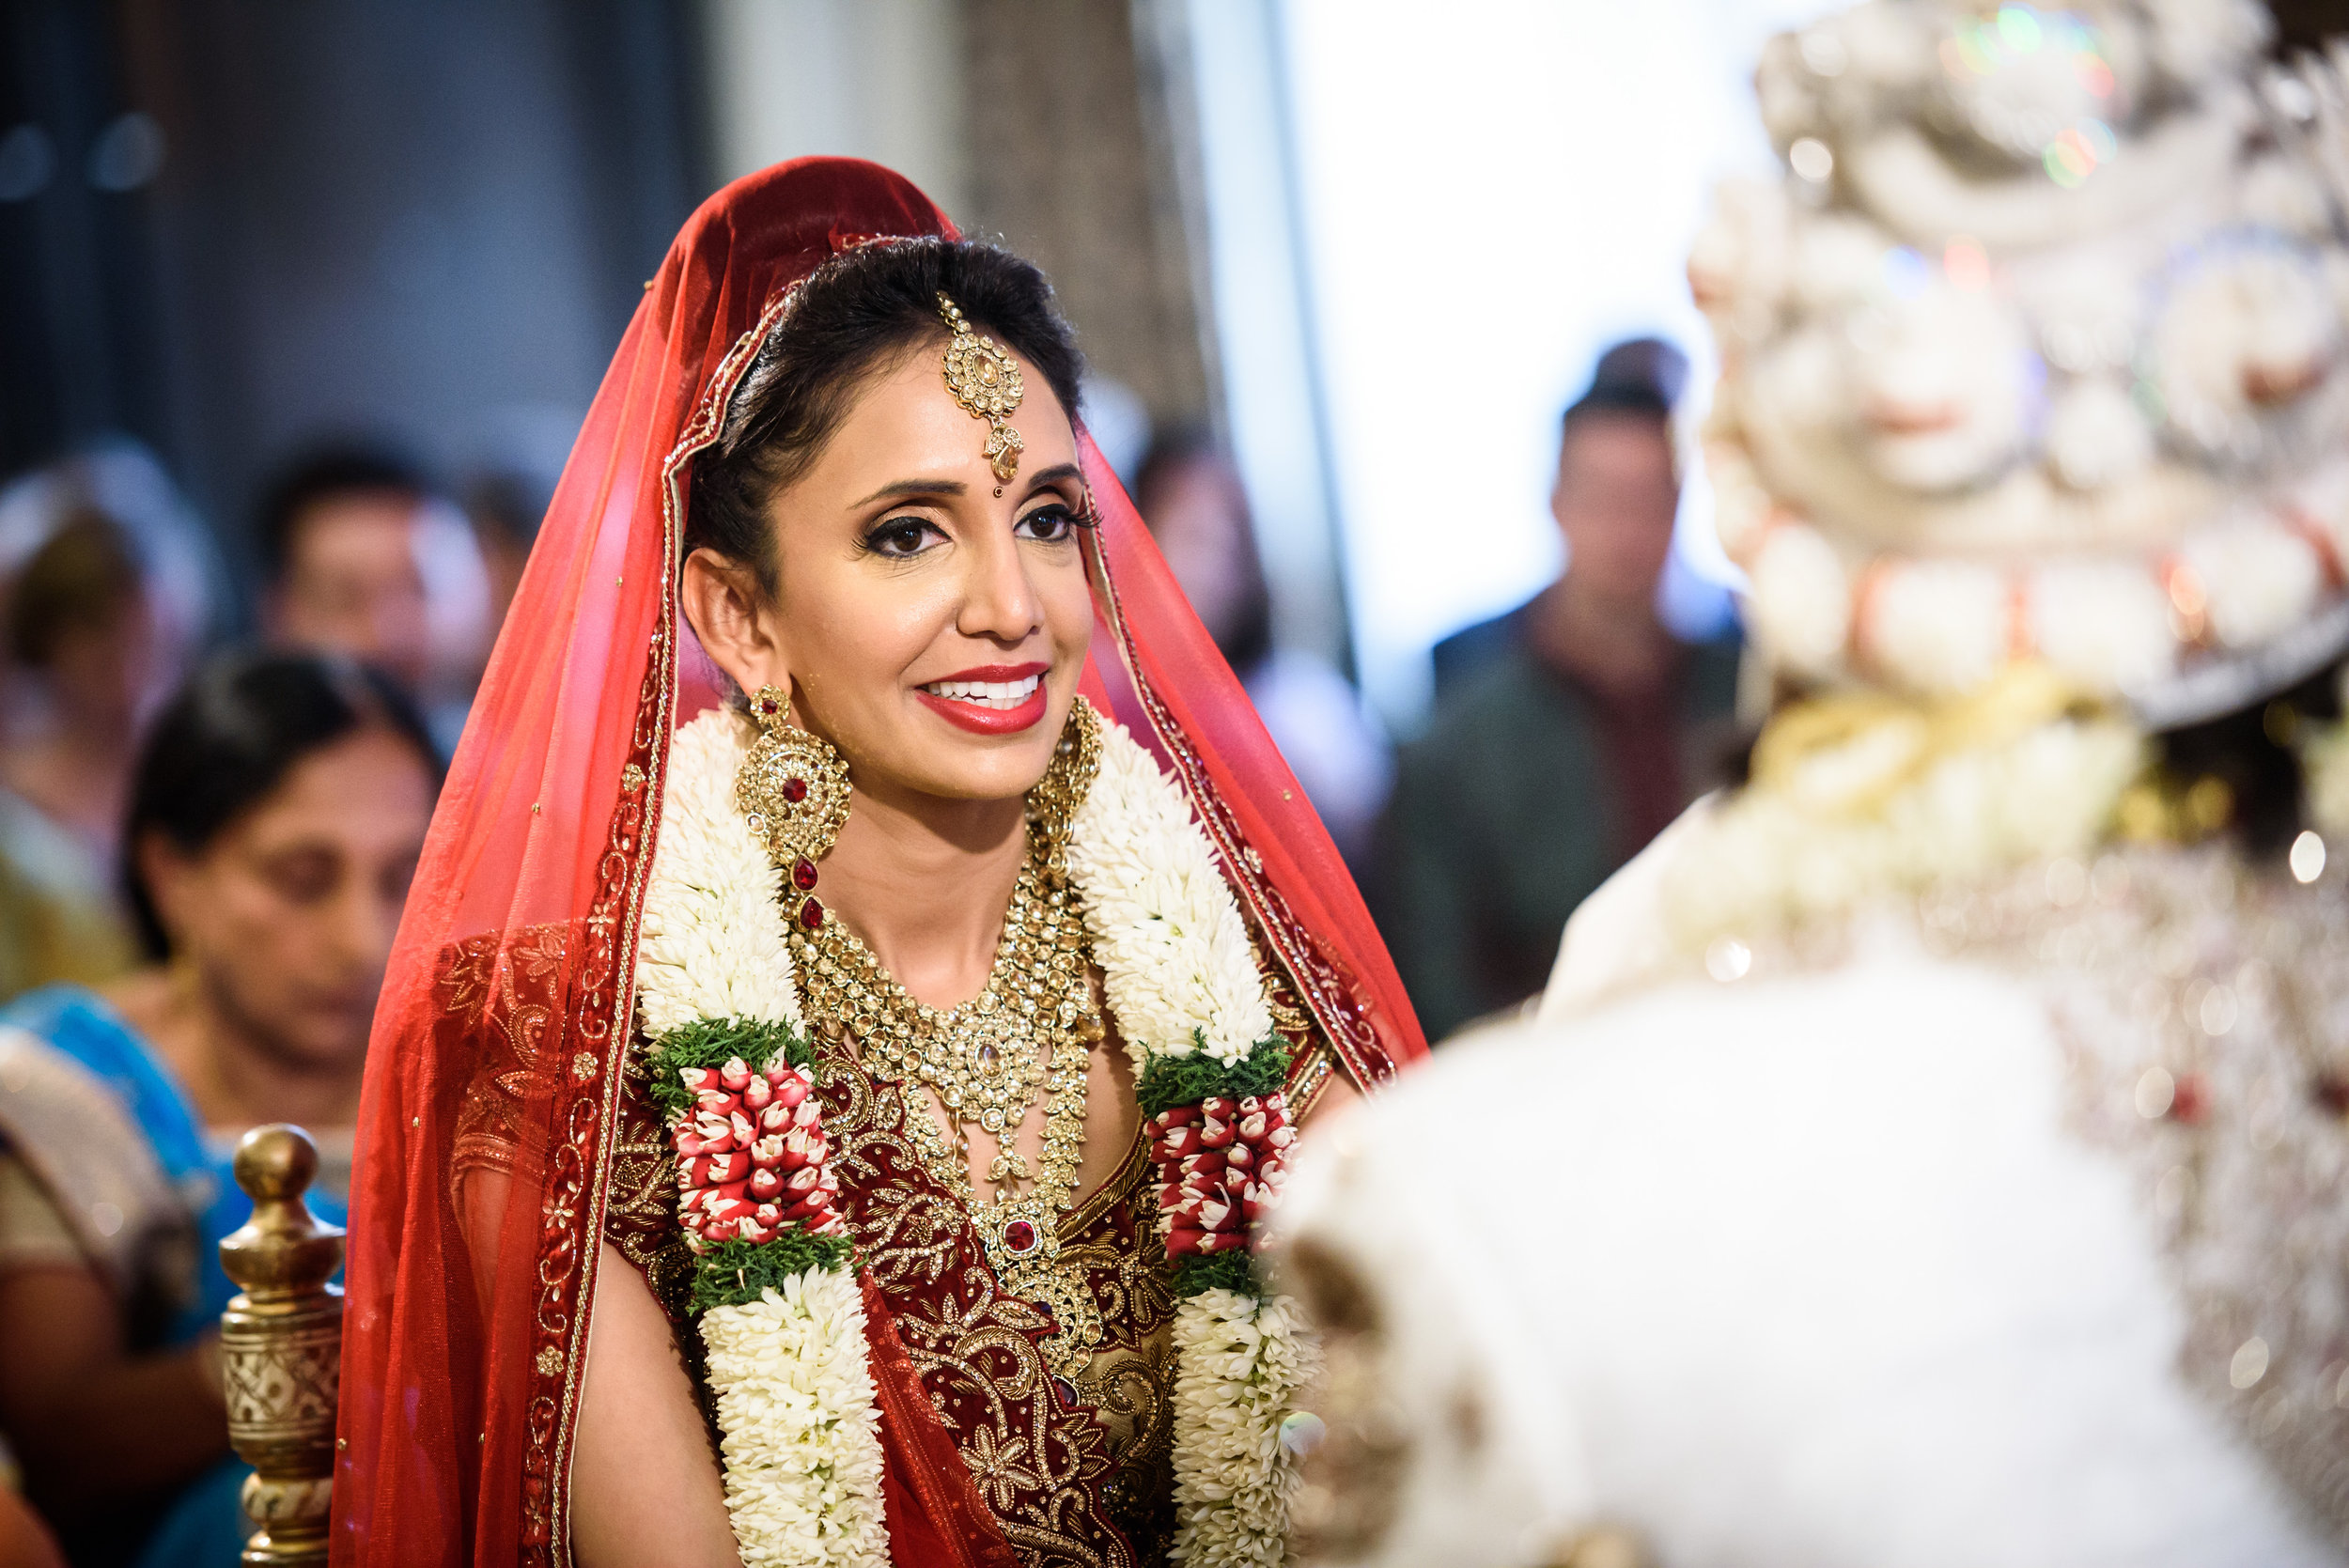 Indian Wedding Stock Photos and Images - 123RF